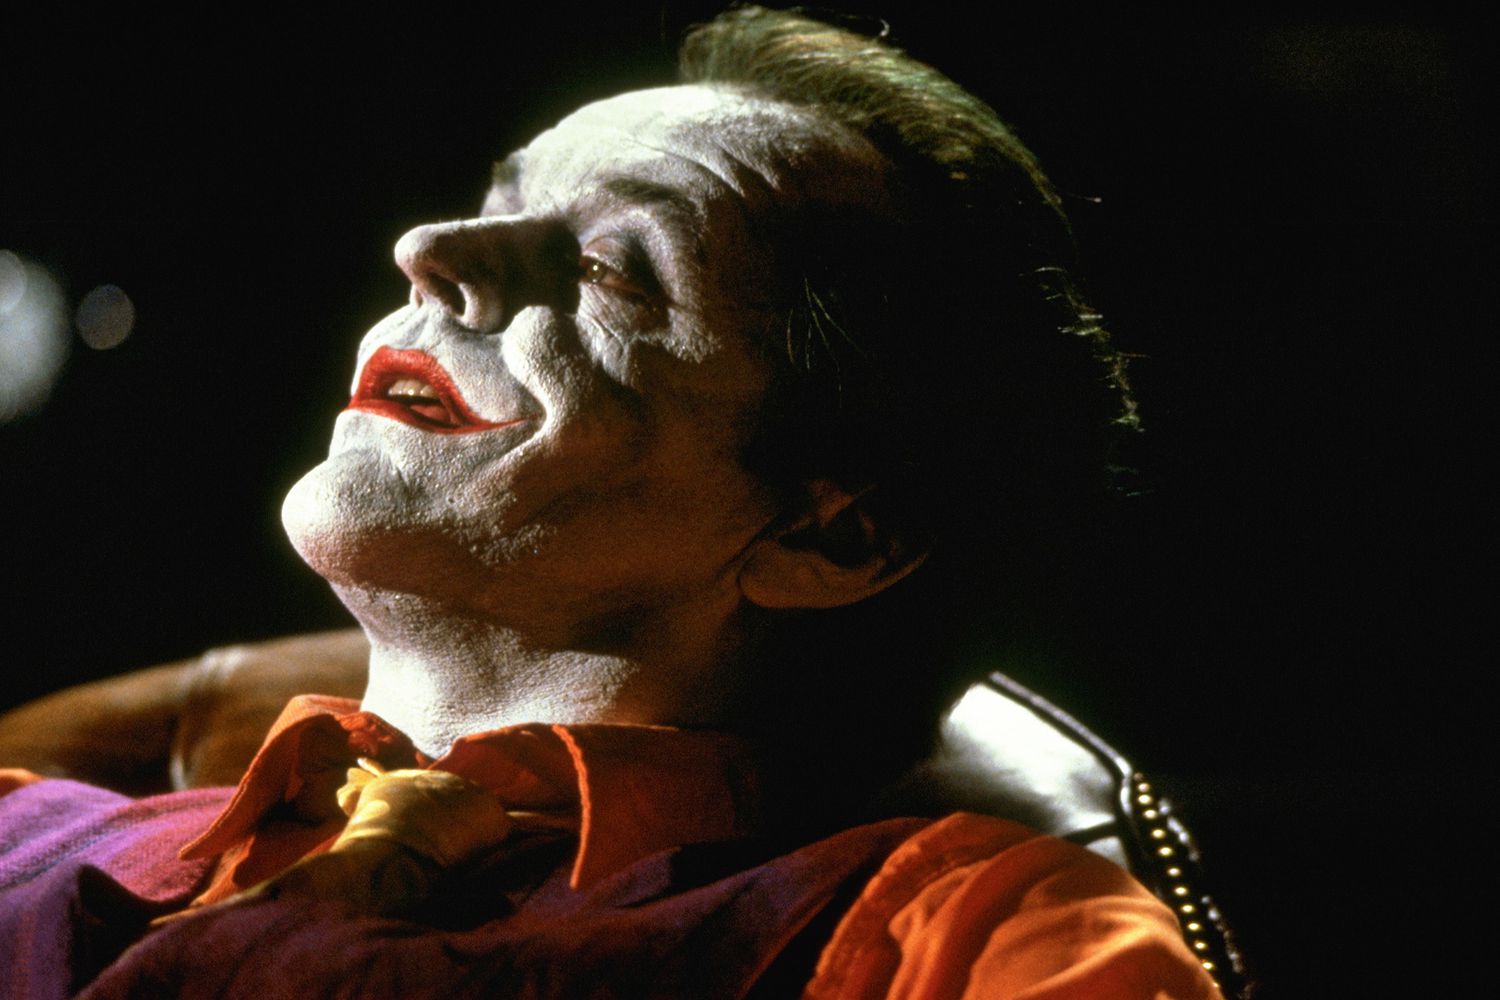 American actor Jack Nicholson plays the Joker in the movie Batman, directed by Tim Burton. (Photo by Murray Close/Sygma/Sygma via Getty Images)